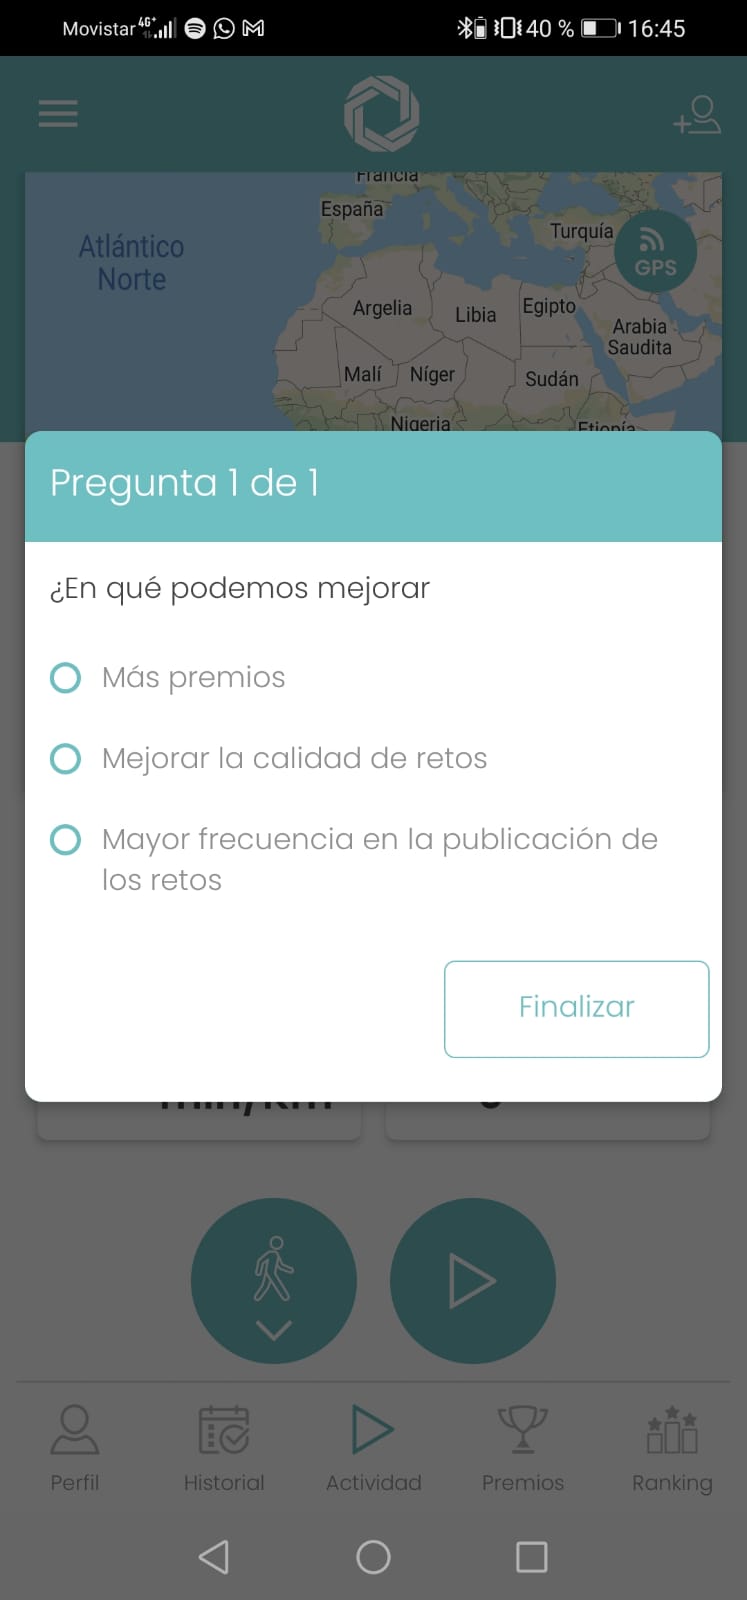 The survey launched by the organization to which the user belongs is displayed.